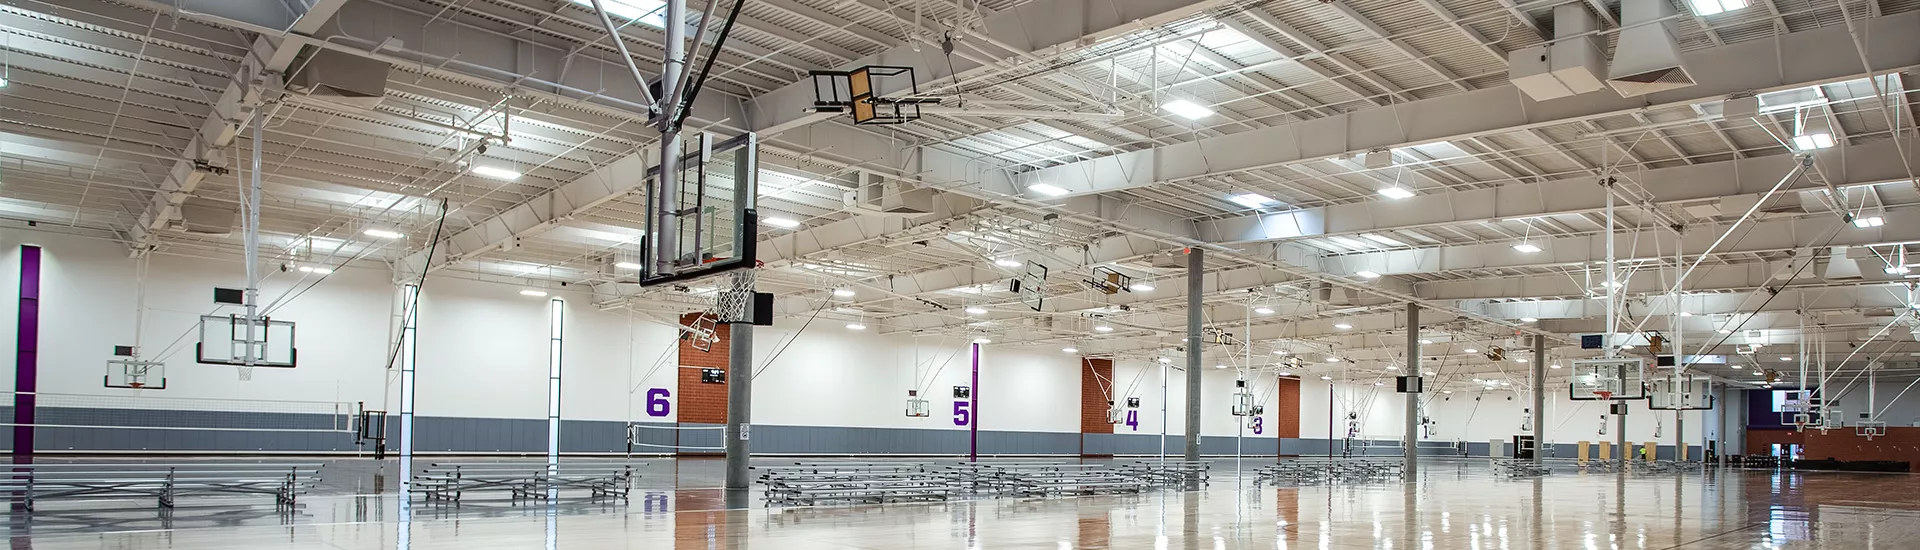 Basketball Backstops, Overhead Volleyball Systems, Wall Pads, and Smart Gym control system with WiFi kit for tablet control installed at Grand Canyon University, Phoenix, AZ.